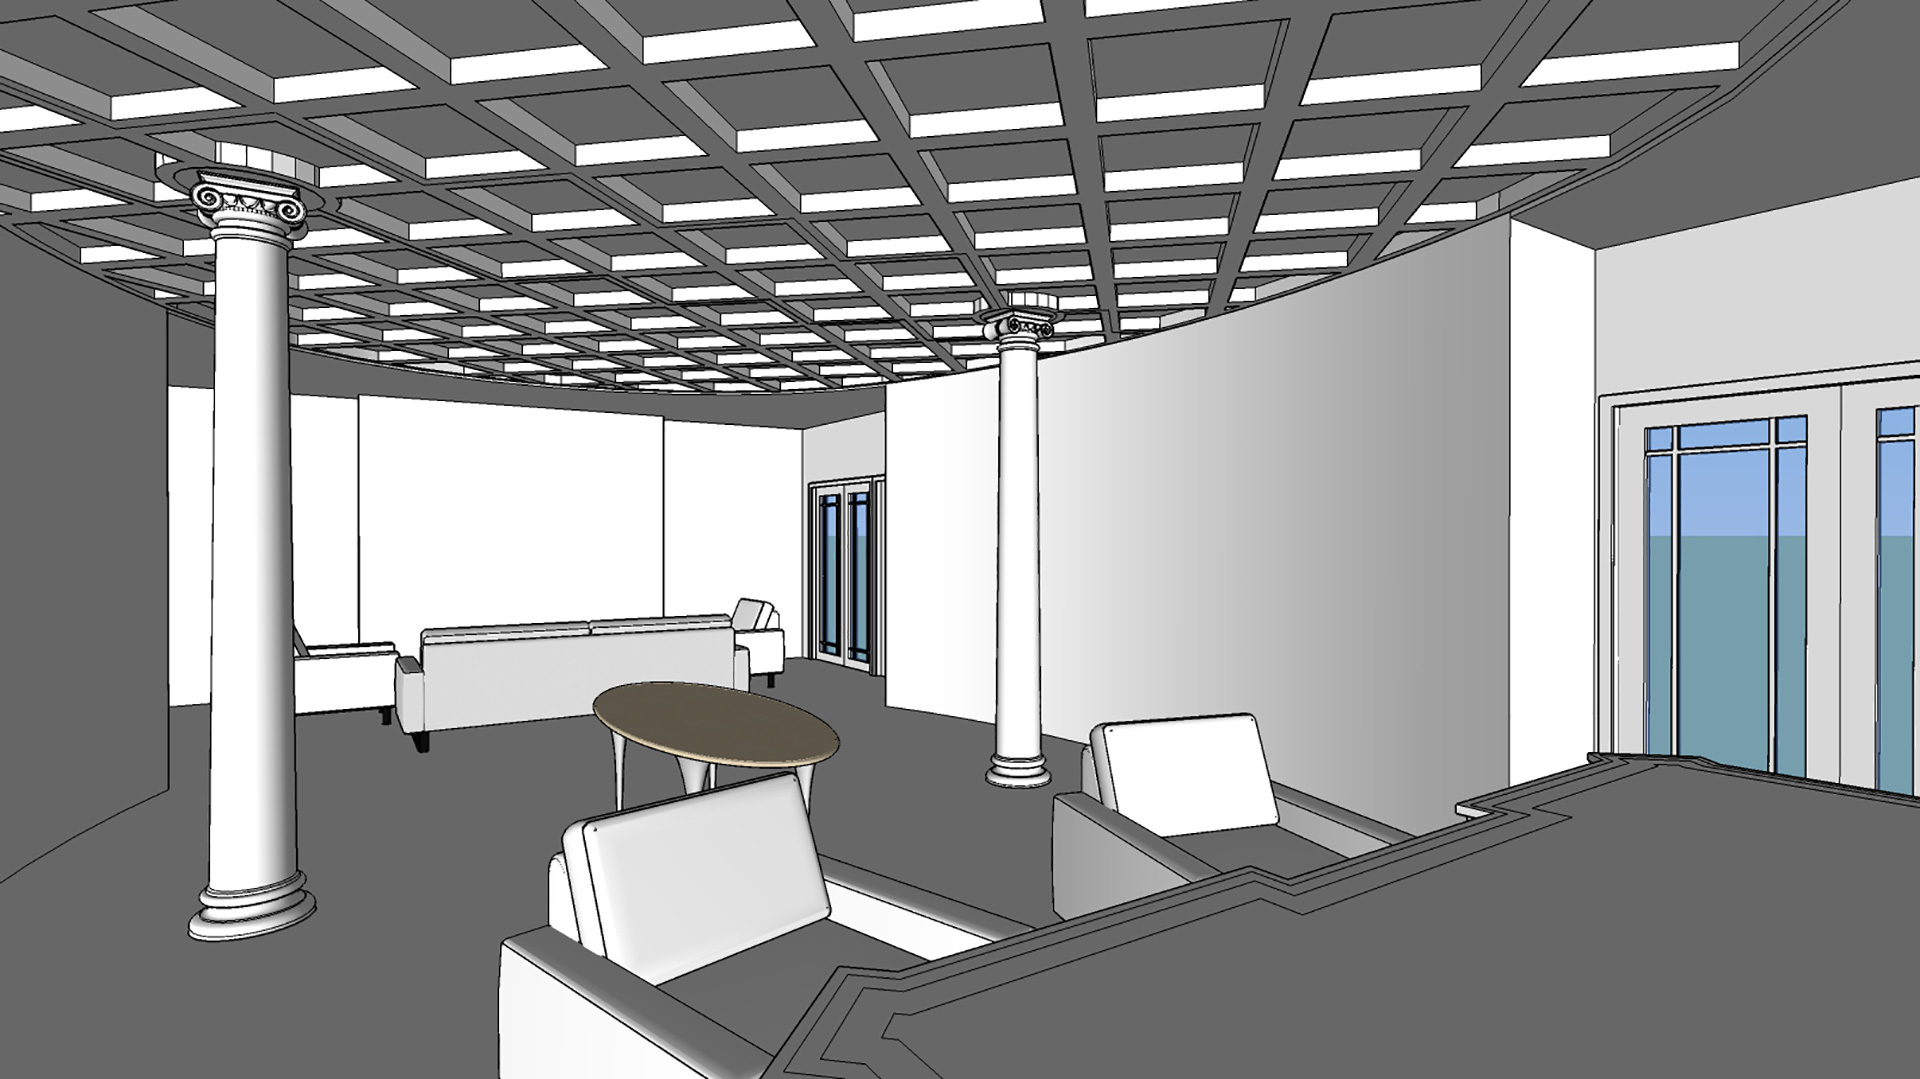 Rendering of library showing sitting area and paneled ceiling.